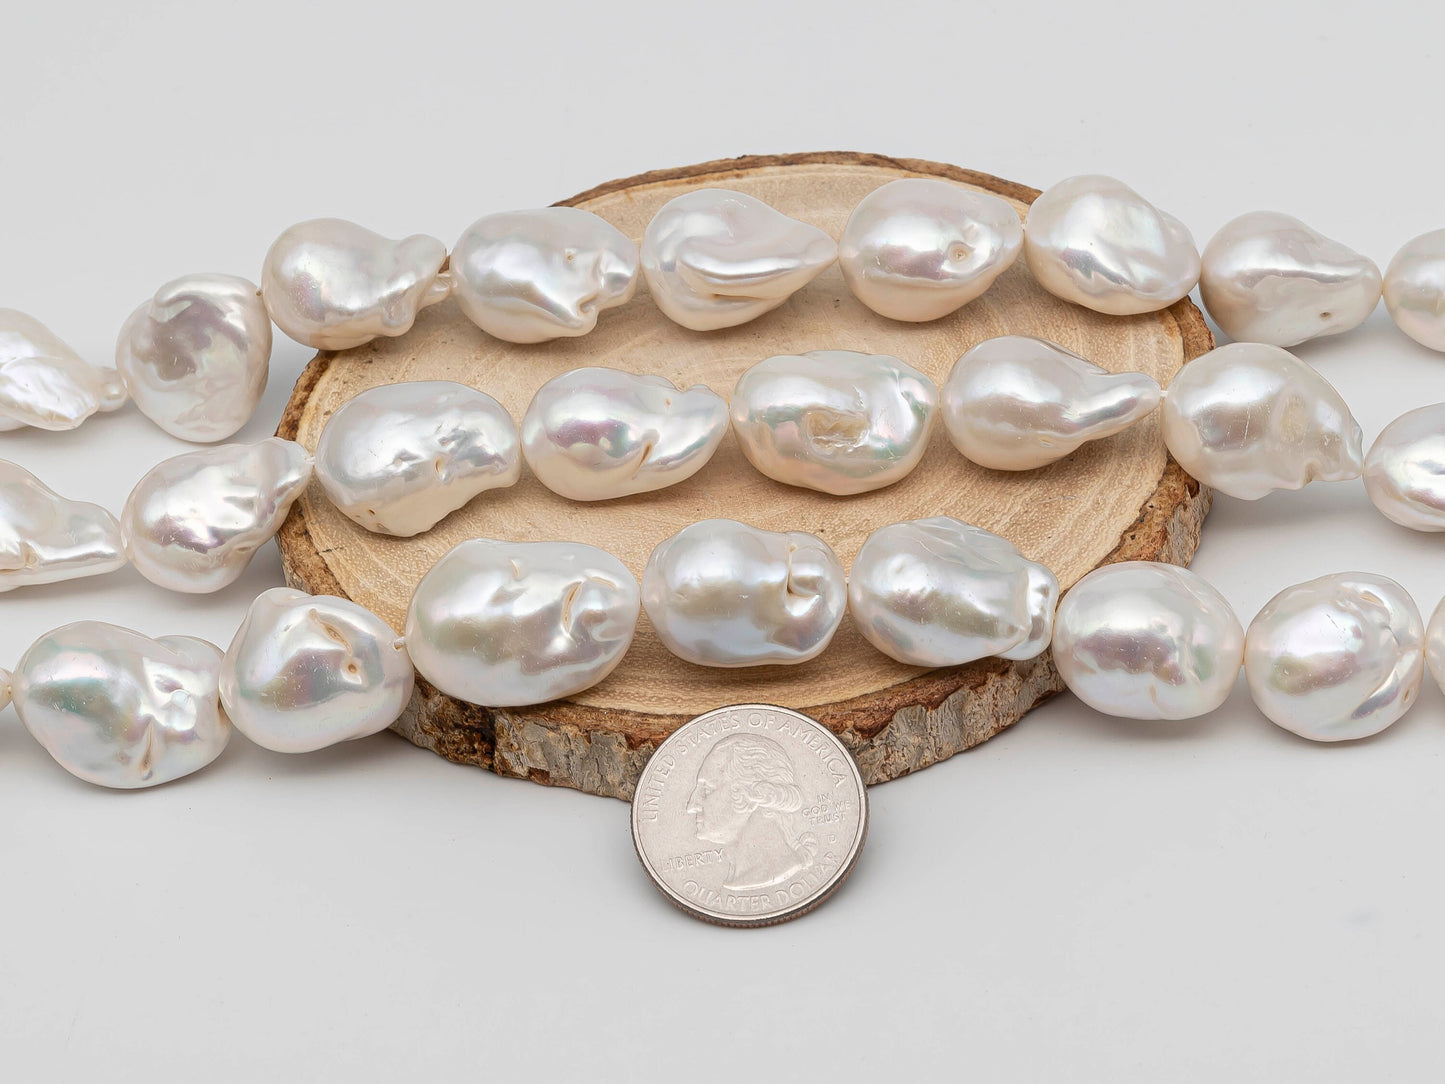 15-17mm White Baroque Fireball Pearl Beads in Full Strand with Nice Luster for Jewelry Making, SKU # 1268BA